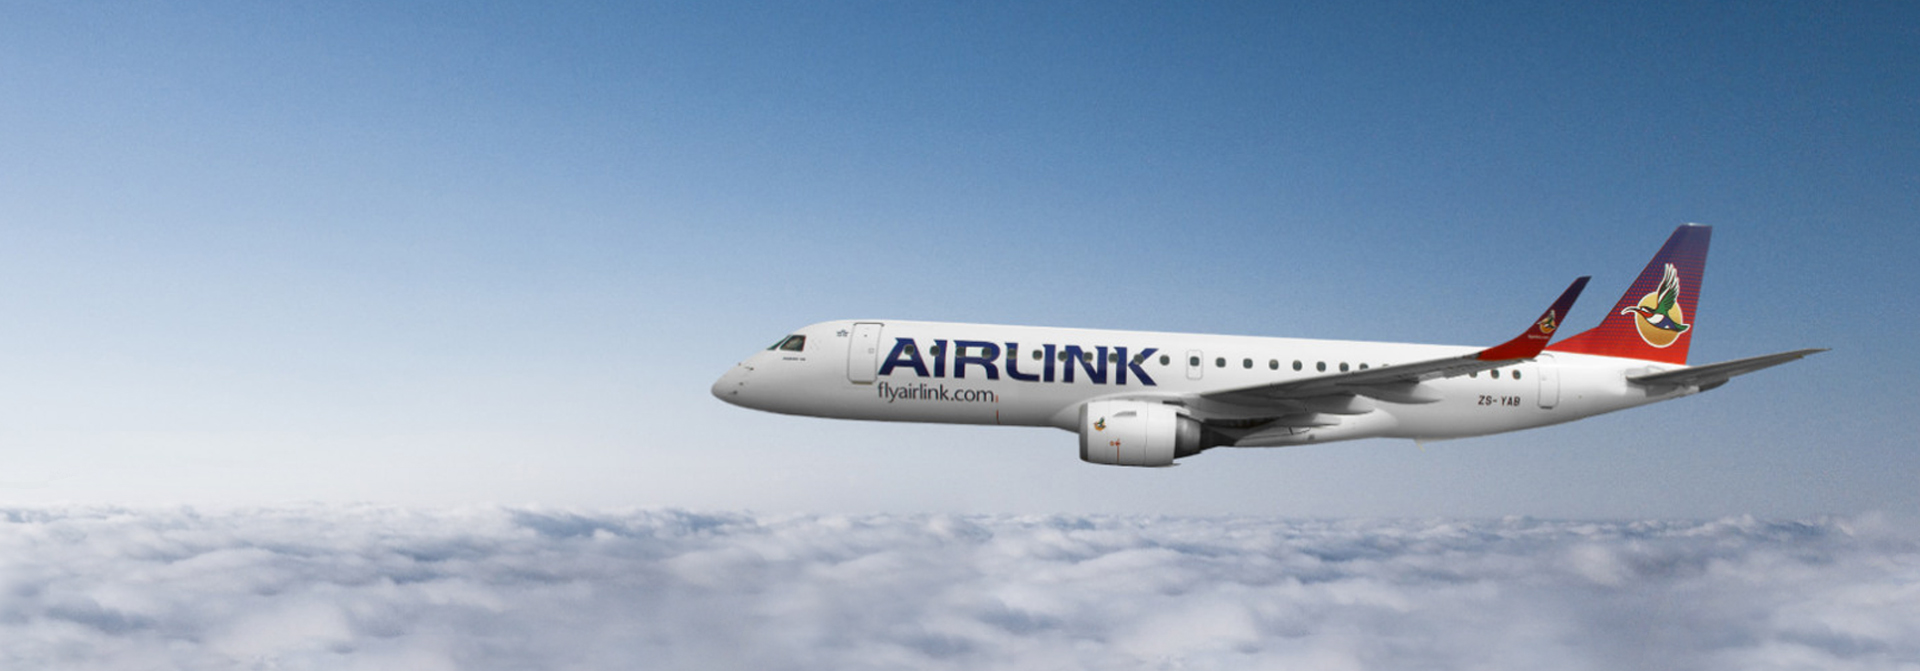 Airlink names AirlinePros International as their General Sales Agent in Singapore